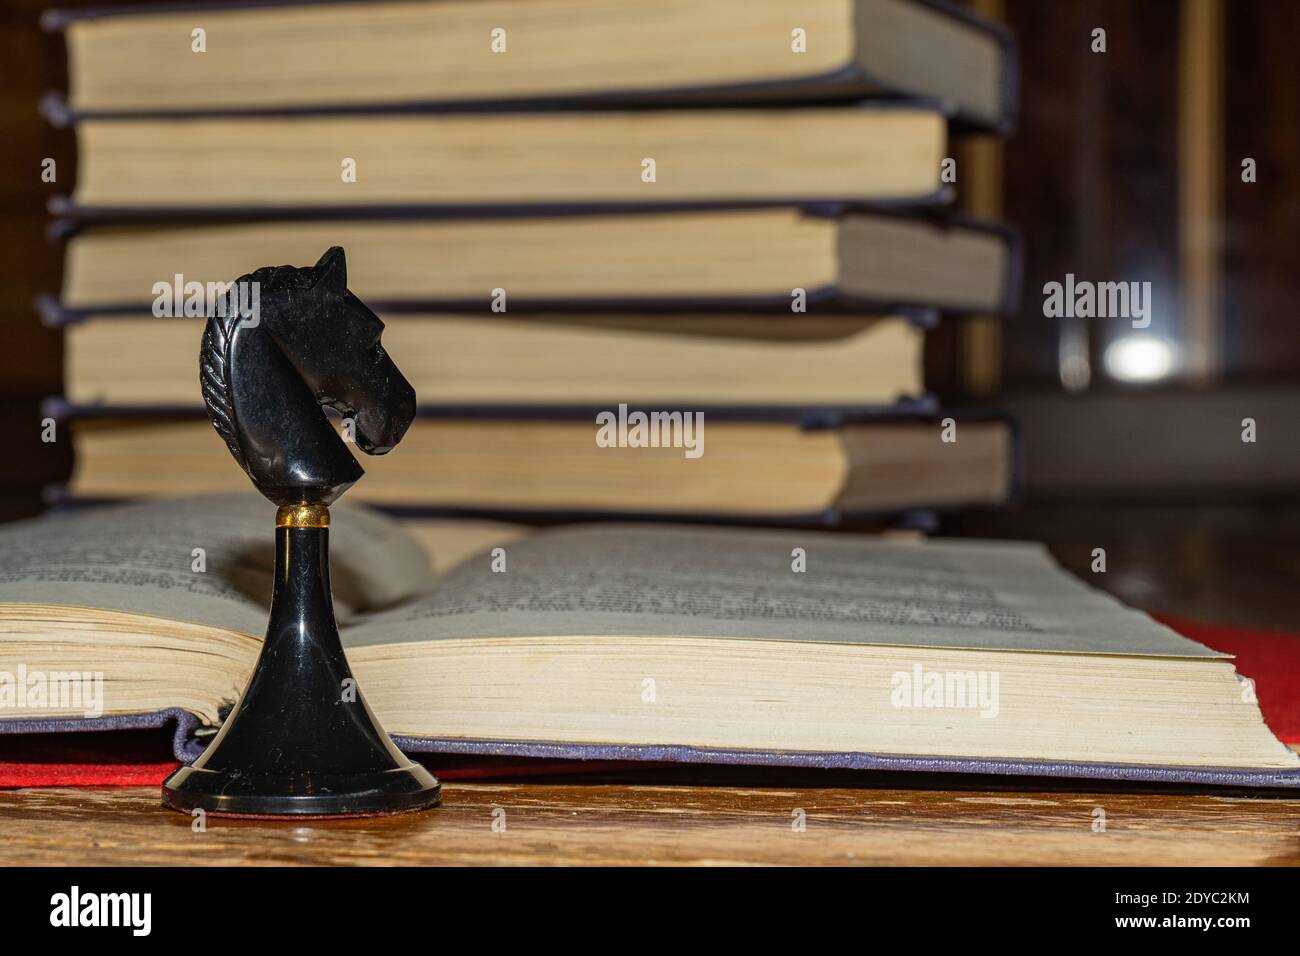 Knights move. Chess piece black knight on the background of an open book Stock Photo